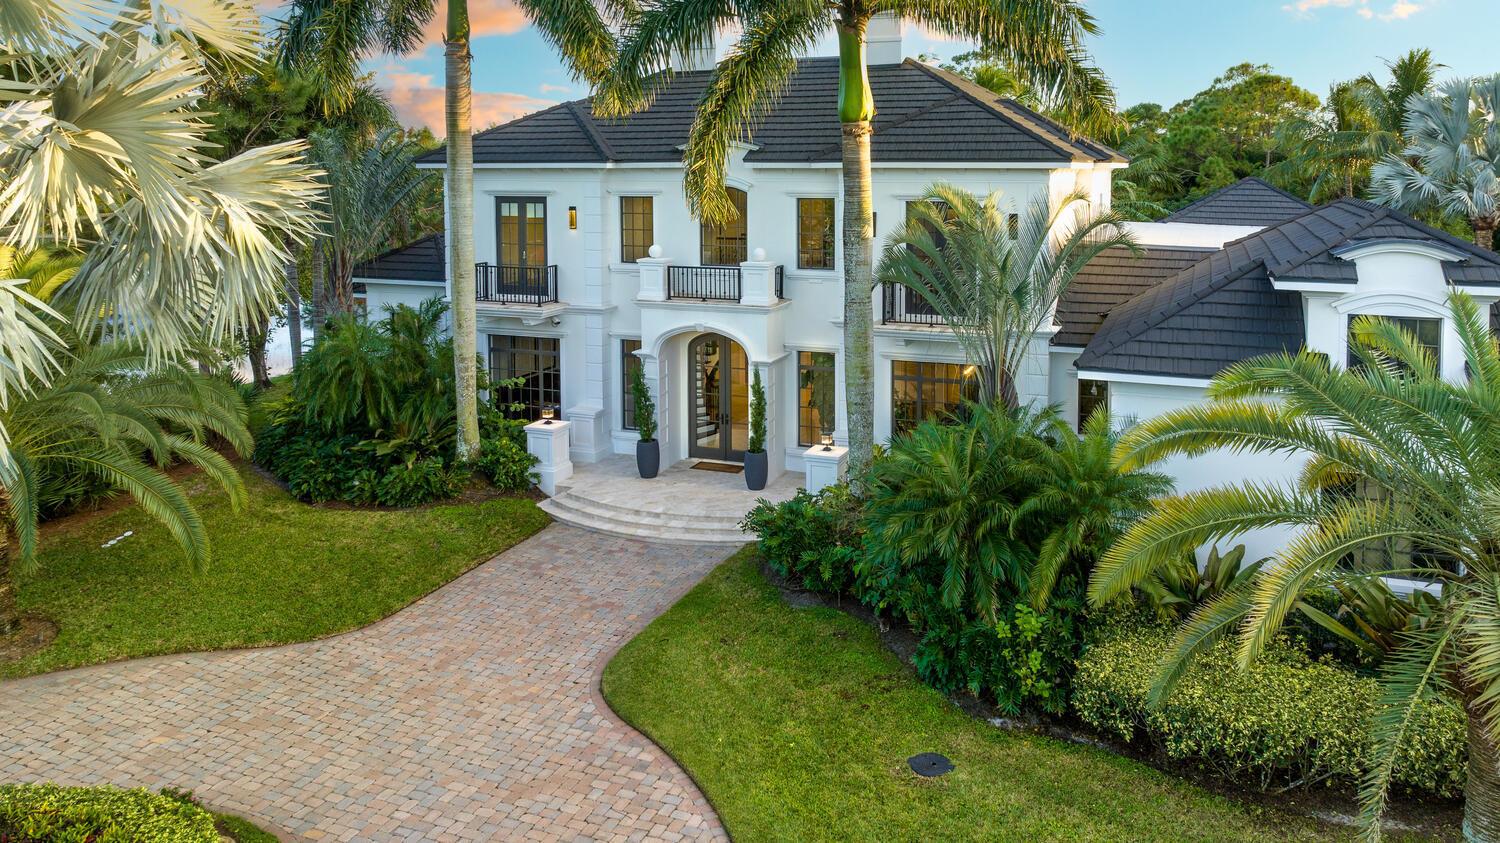 Enjoy the true essence of Florida Living in this exclusive, custom grand estate in the highly sought after gated community of Hidden Bridge. This breathtaking residence features 5 BD, 7 BA & 5,246 LSF (approx.7,000TSF). This stunning home was recently renovated with premier designer finishes and is located on over 1 acre! The tropical backyard oasis features resort style pool, beautiful rock waterfall, exquisitely woven tiki hut & summer kitchen. Upon entering this timeless residence, you are greeted with 20 ft soaring ceilings. This home is the perfect combination of modern yet warm atmosphere. Ideal for entertaining guests with oversized living & bar area. The custom kitchen w/ gas stove & Viking appliances & double islands open to the family area ideal for entertaining friends & family. Enjoy holidays or special events in the formal dining room with exquisite crown molding throughout. The backyard oasis complete with oversized resort style pool, spa and breathing rock waterfall are the ultimate place to relax at home. Sit on the comfy lounge chairs surrounded by the beach underlay or enjoy a time out in the unique wooden tiki hut complete with seating for a large party and calming serene breezes and windchimes. The downstairs master features his and her oversized closets and an outdoor seating area with views of the backyard oasis. Work from home with ease in the spacious home office complete with palm tree views. As you walk up the grand staircase to the second story you are greeted by an open flex space perfect for loft, kids area or home gym . The split floor plan has 4 full oversized bedrooms each with ensuite bathrooms. This rare gem provides impeccable internals throughout, central vac, new HVACS, water heater, full house generator &amp; new roof. The 3 car garage with circular driveway and extra parking throughout. The gated community of Hidden Bridge features a gorgeous exclusive gated neighborhood of only 16 homes and low HOA. Don't miss out on this incredible opportunity to own this custom estate. Call today for our private showing.